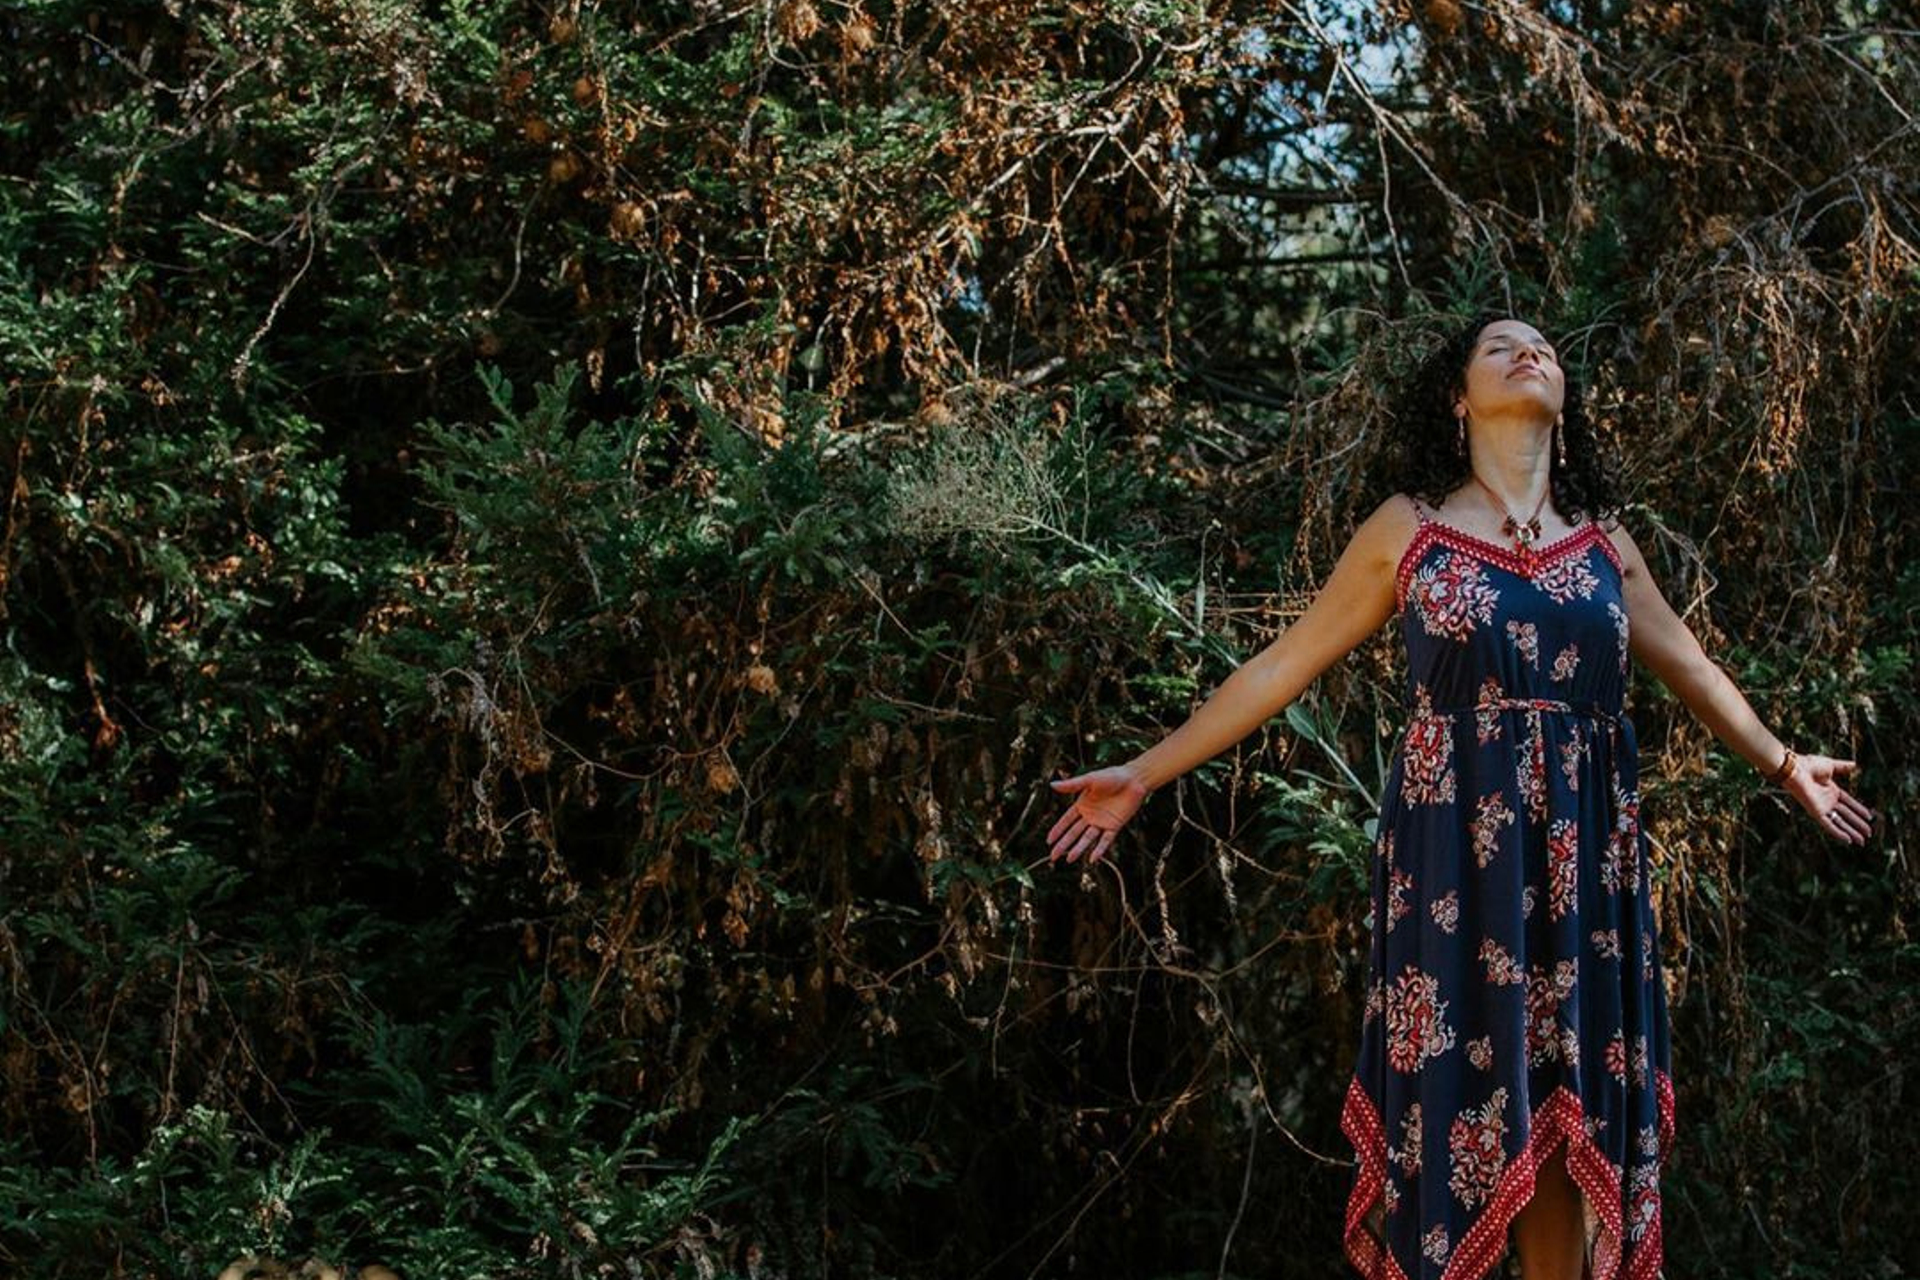 Natalie Gutierrez stands on a tree stump with arms outstretched in a forest